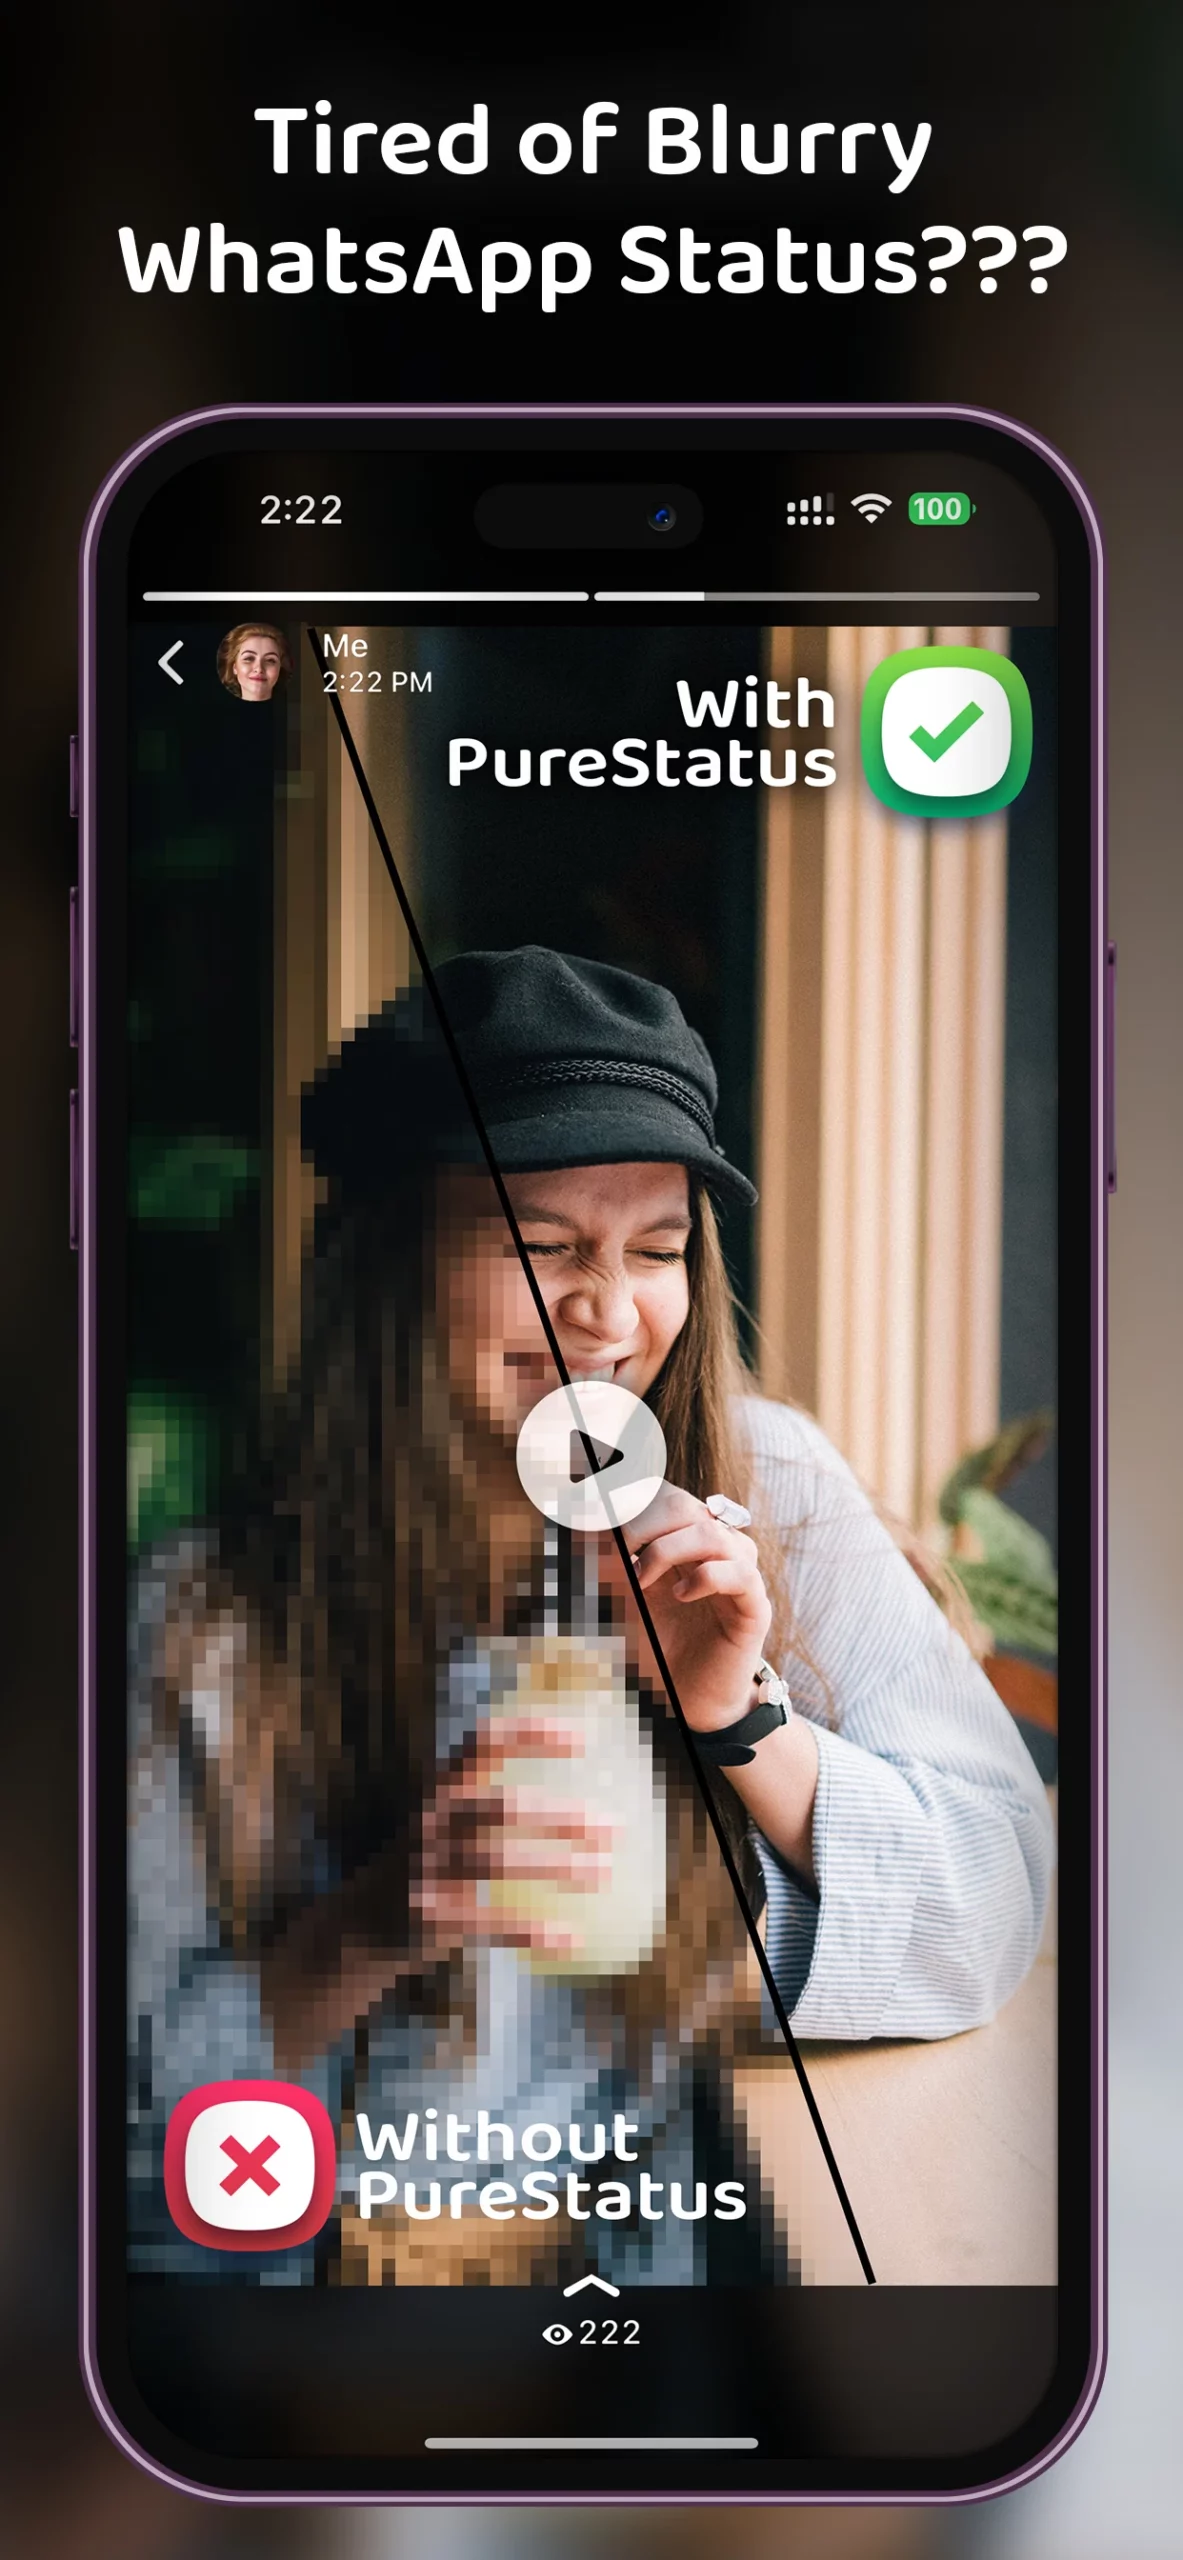 PureStatus: ByeBye Blur Status
DamTech Designs
Contains adsIn-app purchases
4.2
star
20K reviews
1M+
Downloads
Content rating
Rated for 3+
info